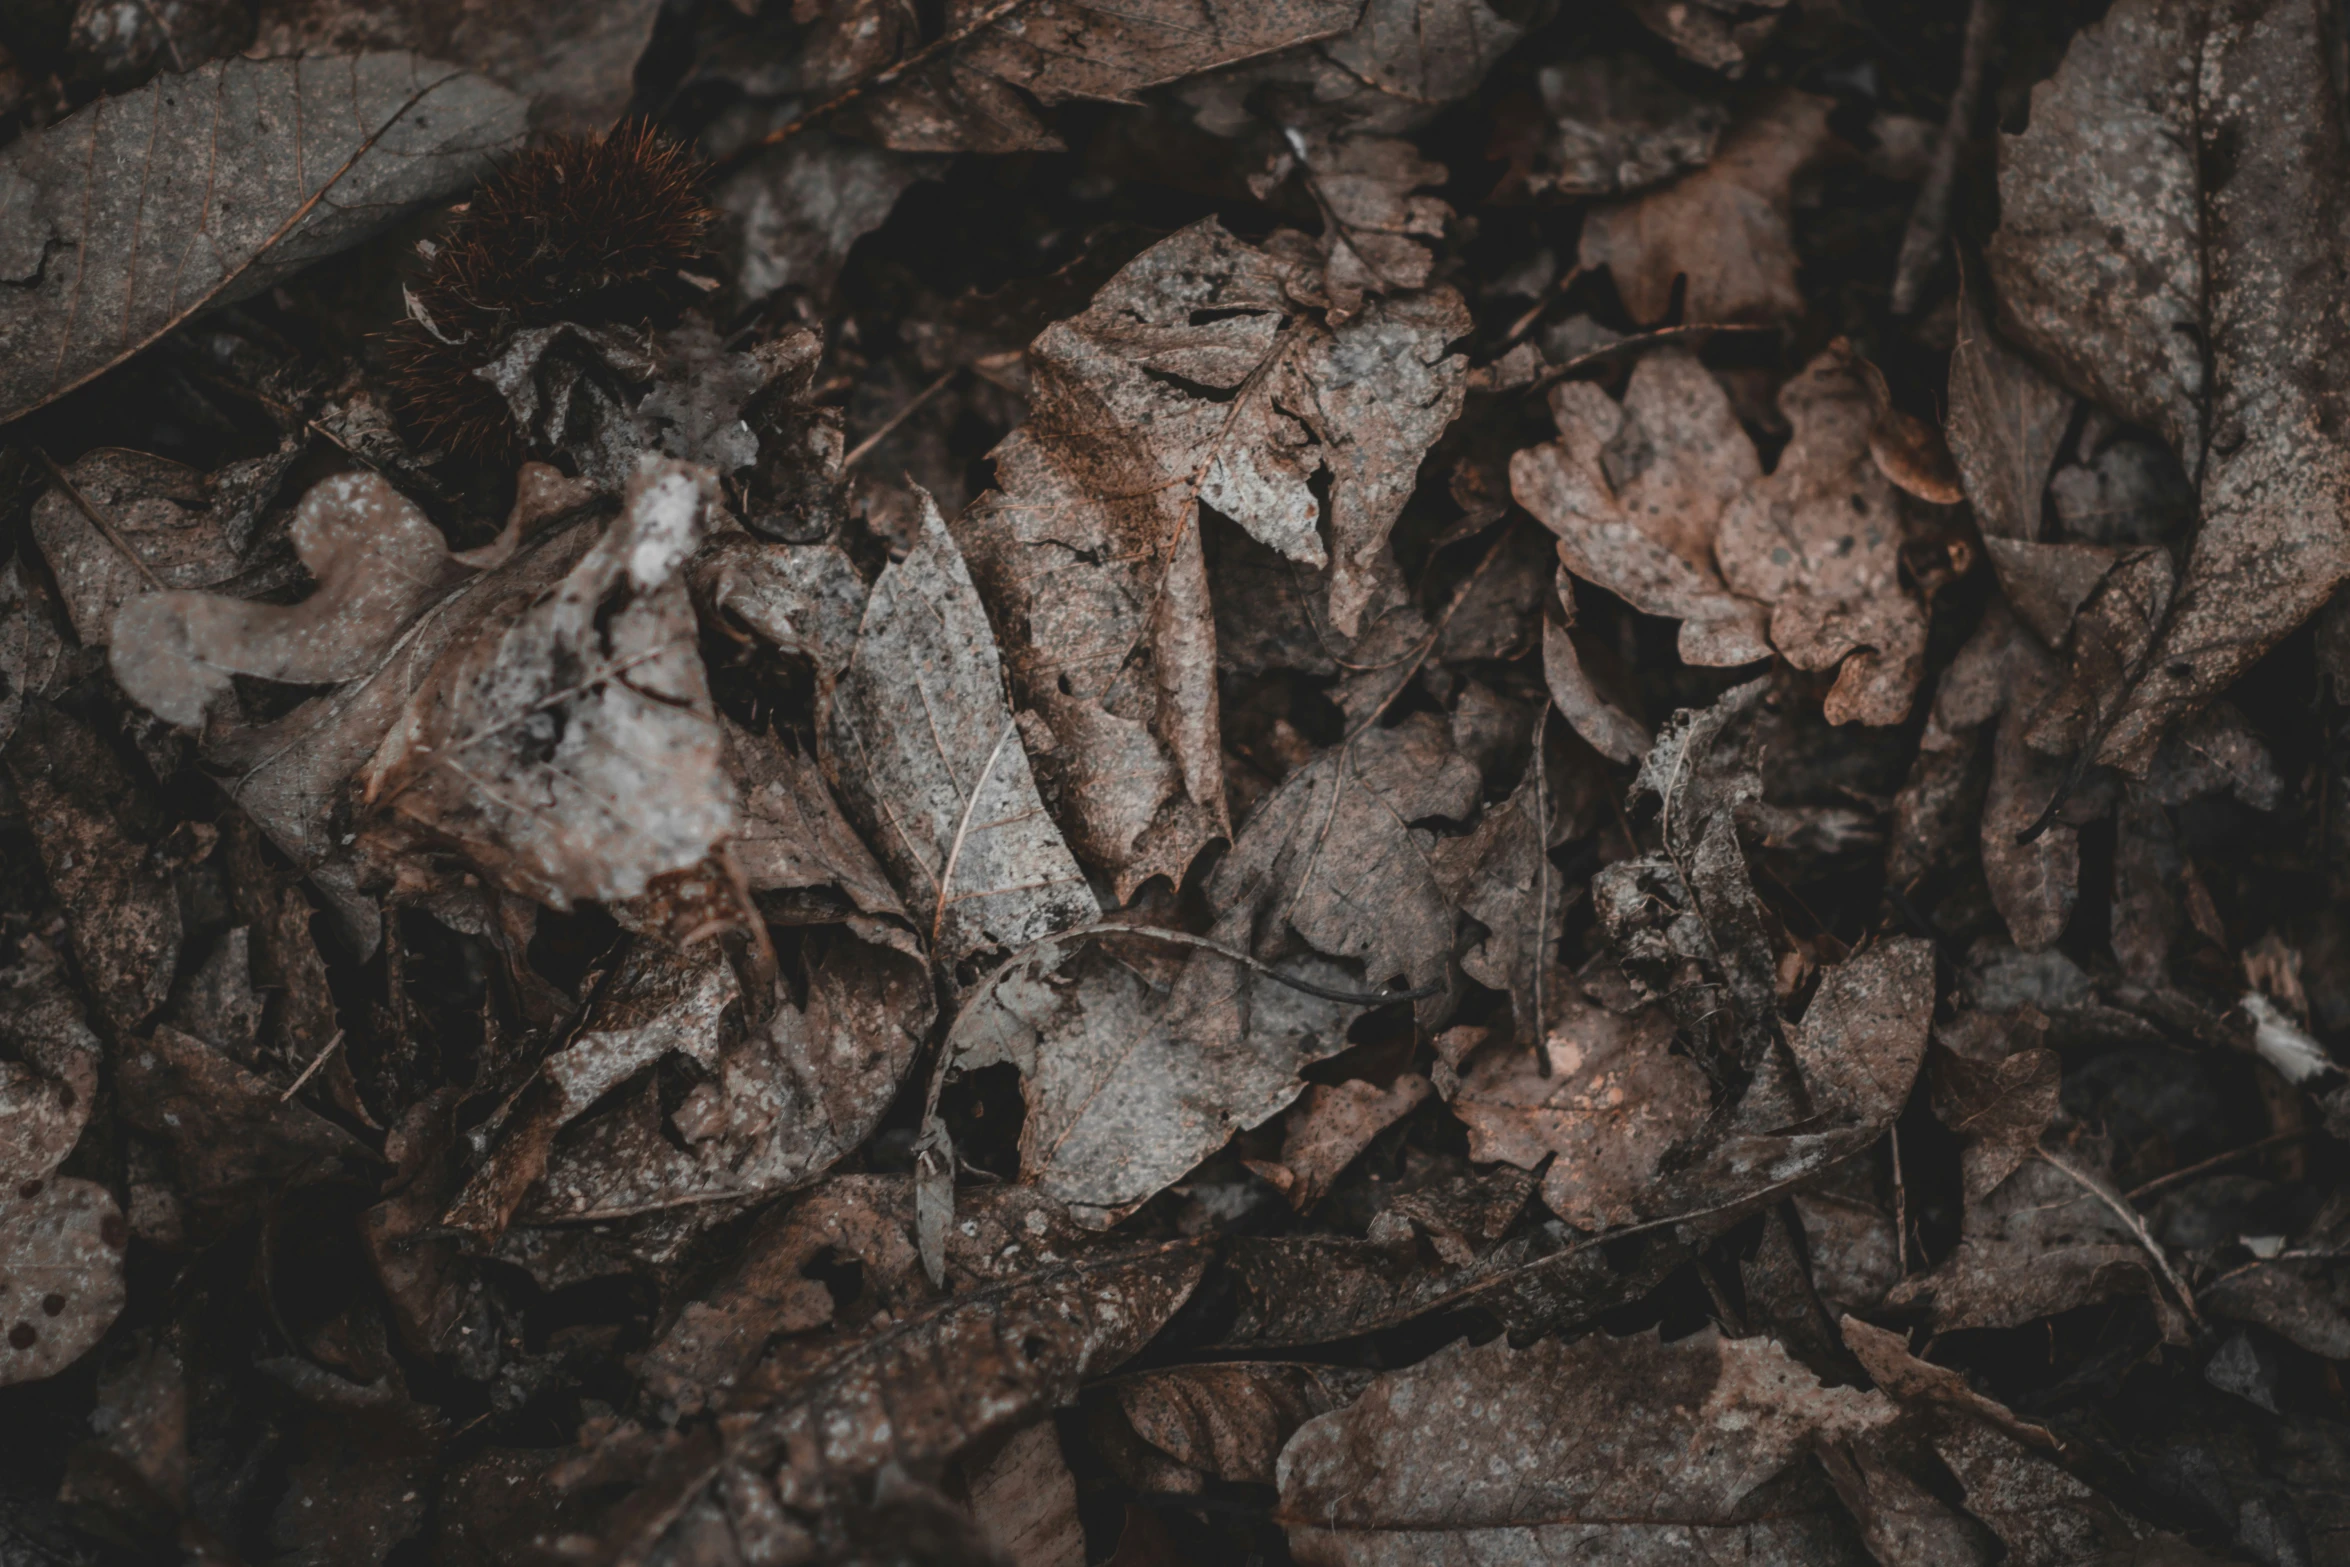 there is leaves, dirt and rocks next to each other